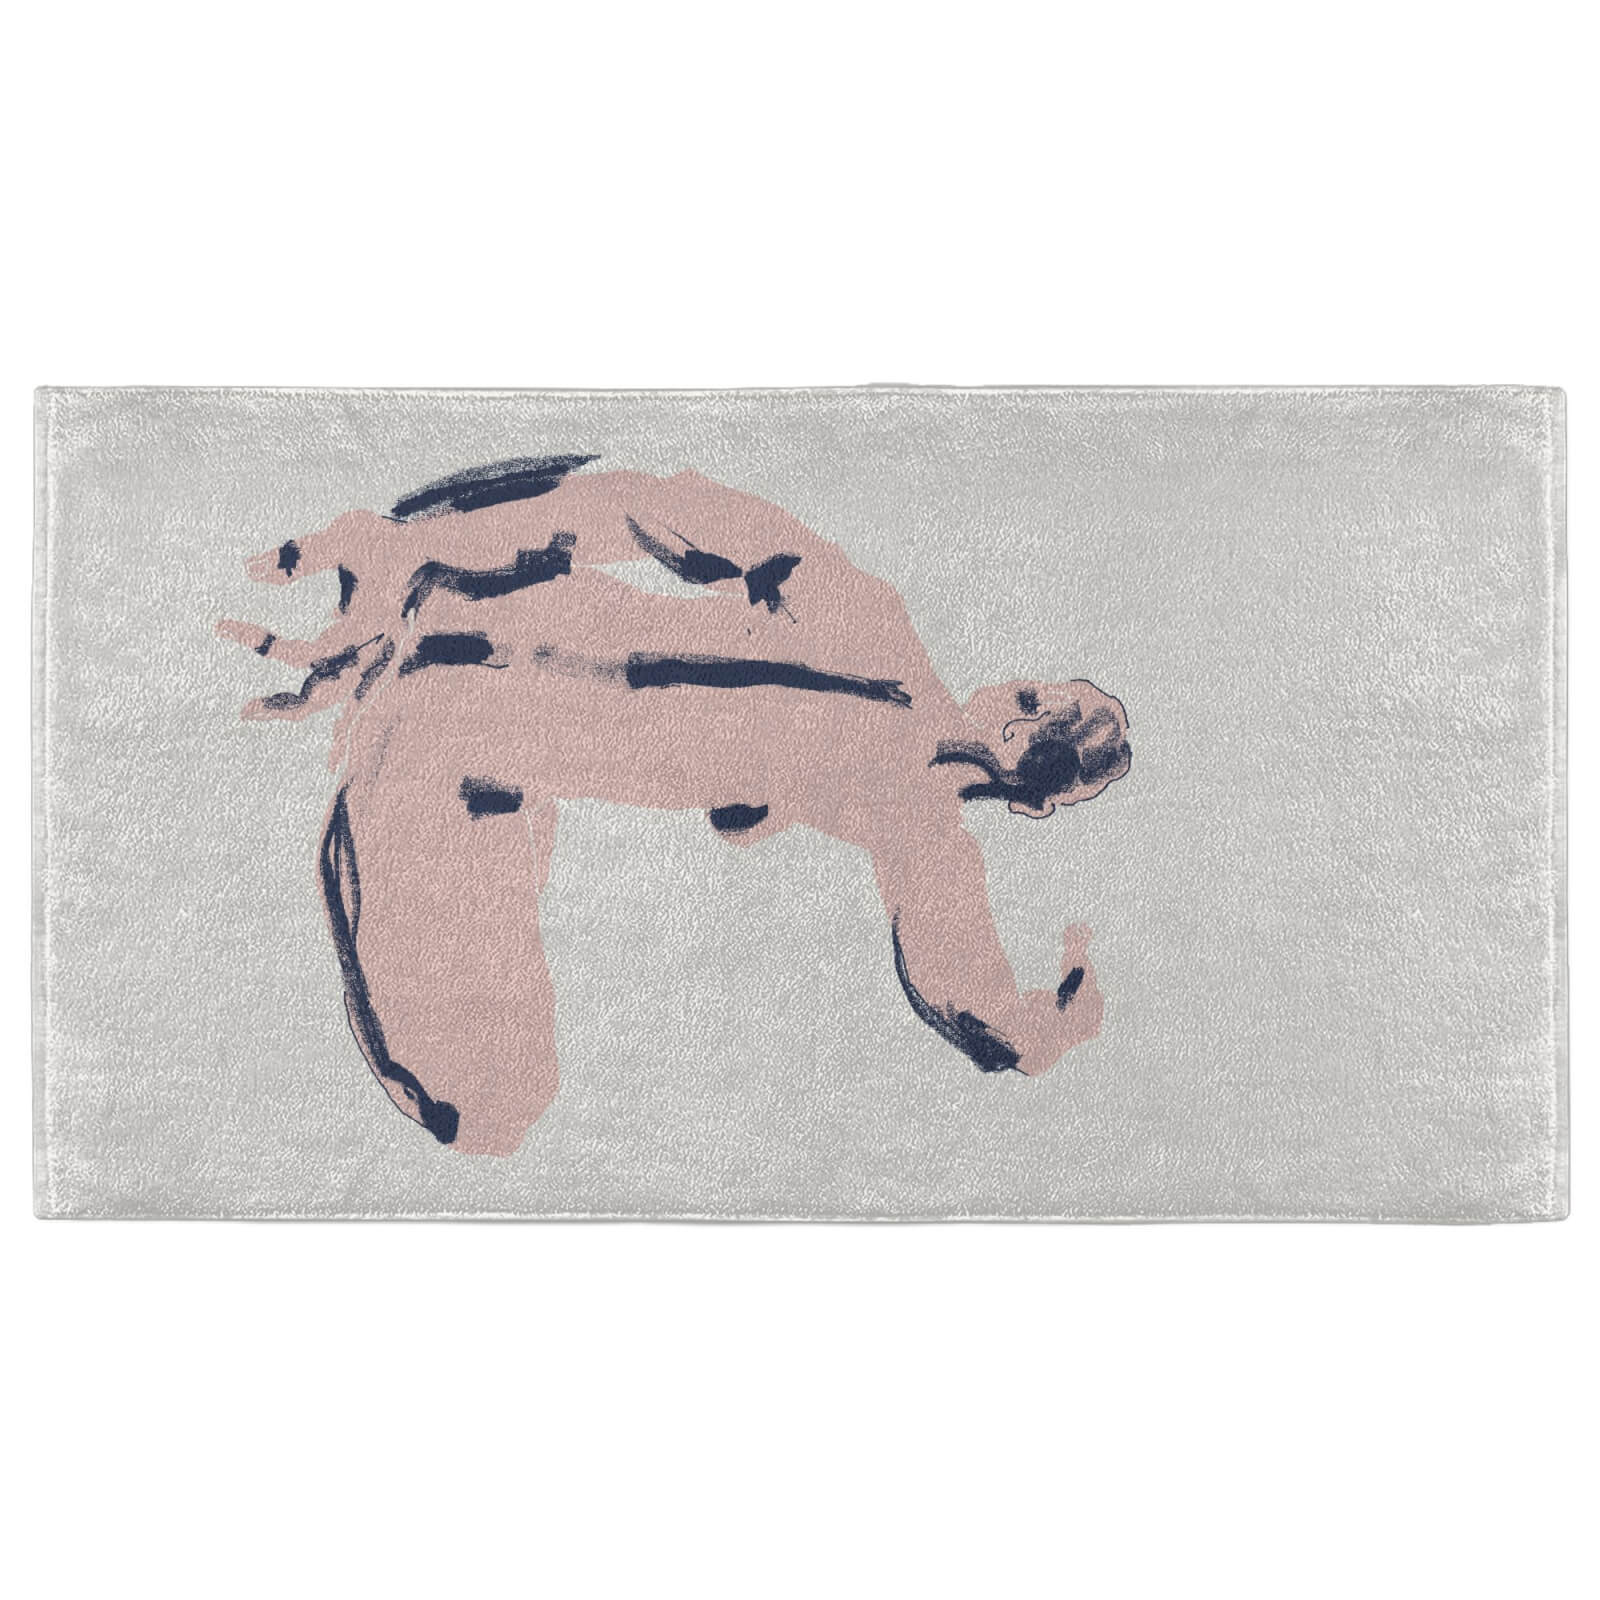 Seated Nude Back View Hand Towel